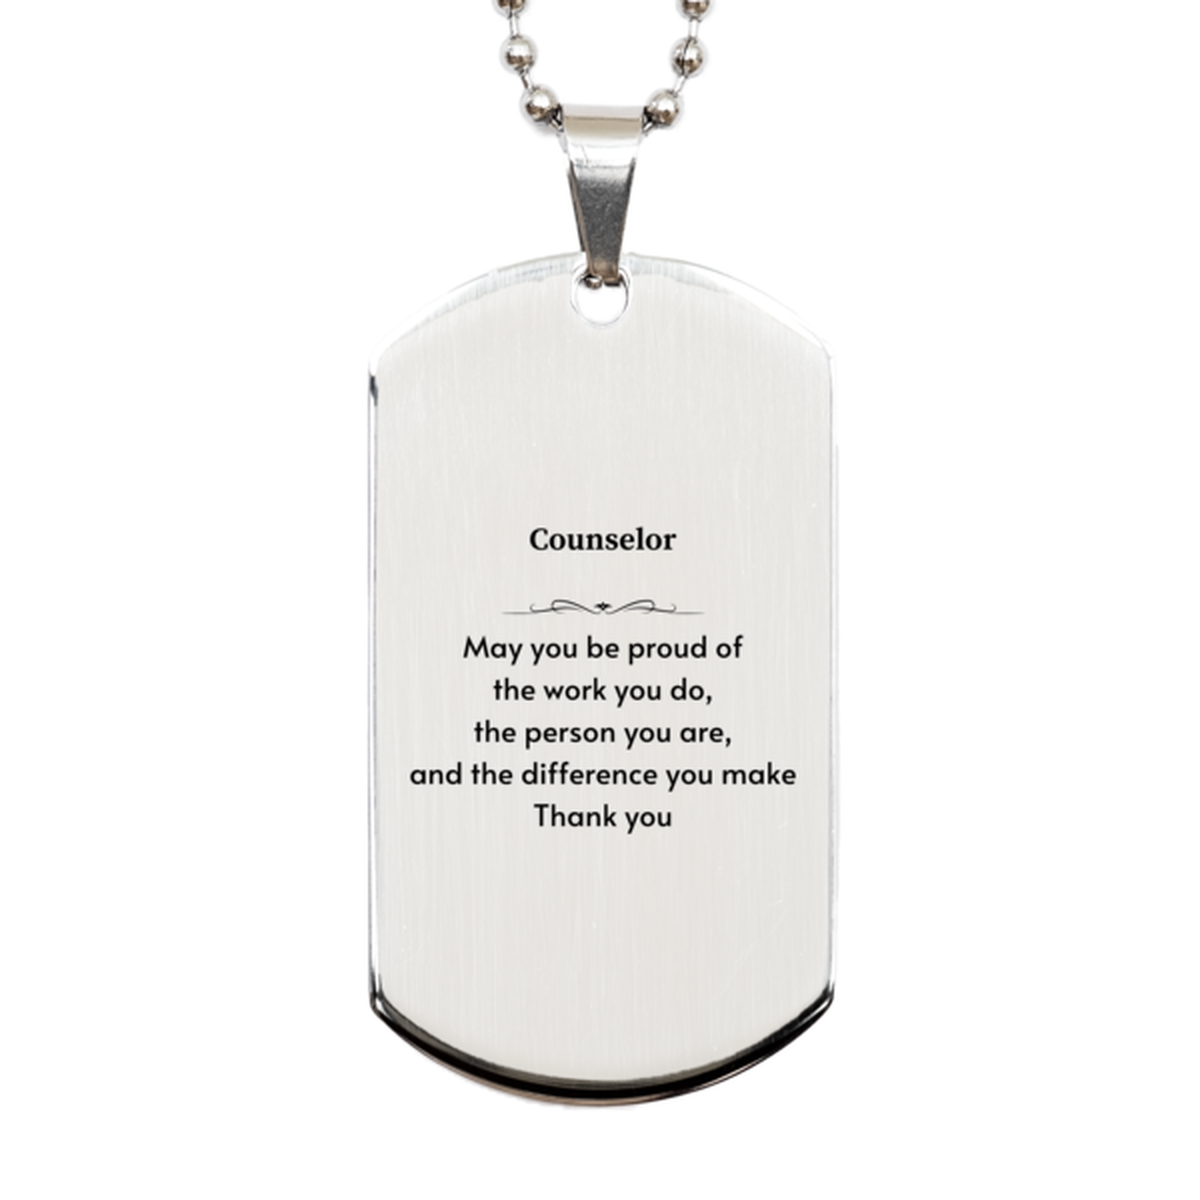 Heartwarming Silver Dog Tag Retirement Coworkers Gifts for Counselor, Counselor May You be proud of the work you do, the person you are Gifts for Boss Men Women Friends